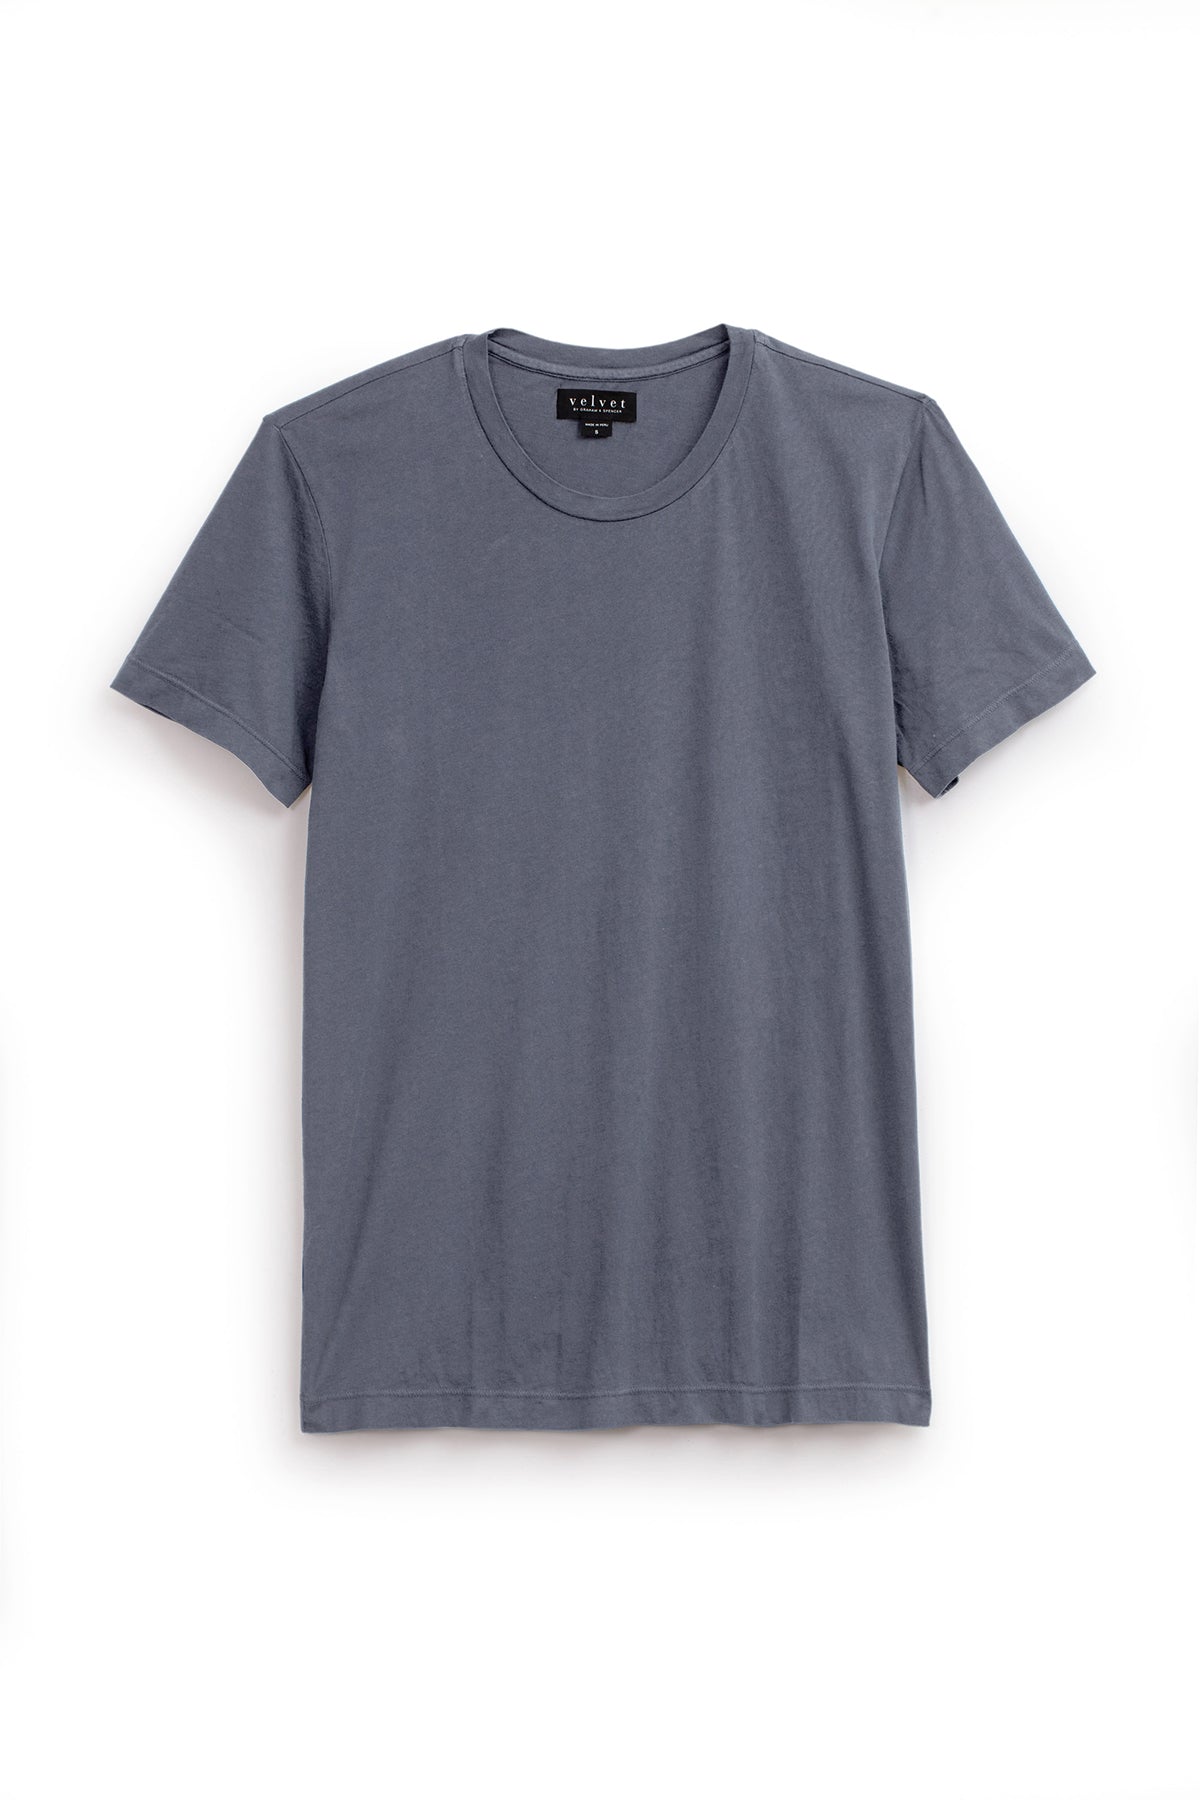 A lightweight HOWARD WHISPER CLASSIC CREW NECK TEE in blue with a vintage-feel softness, by Velvet by Graham & Spencer.-25793661370561